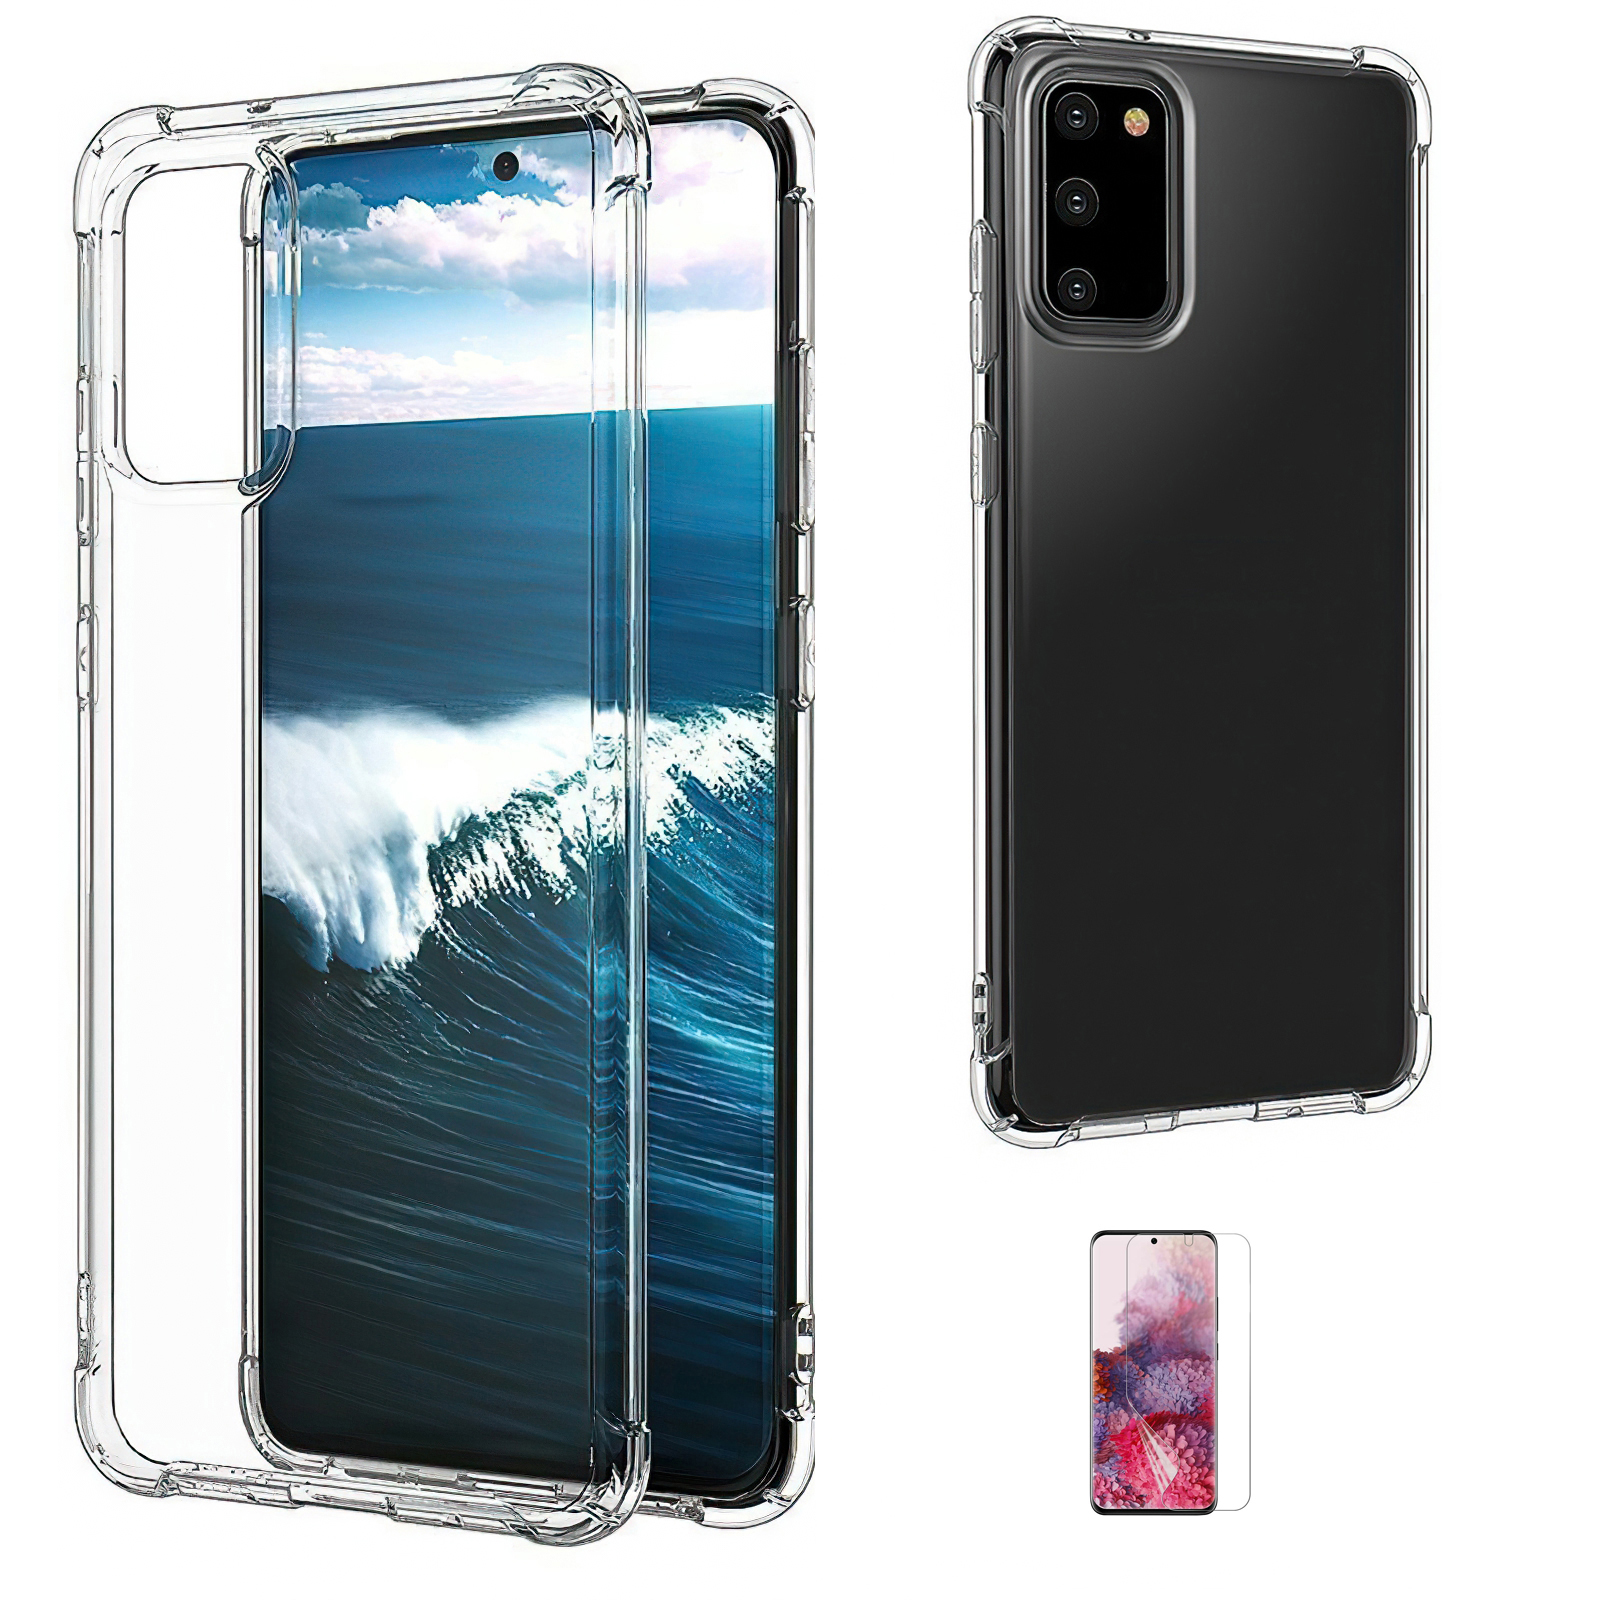 Samsung Galaxy S20 FE 5G - Case Protection Transparent